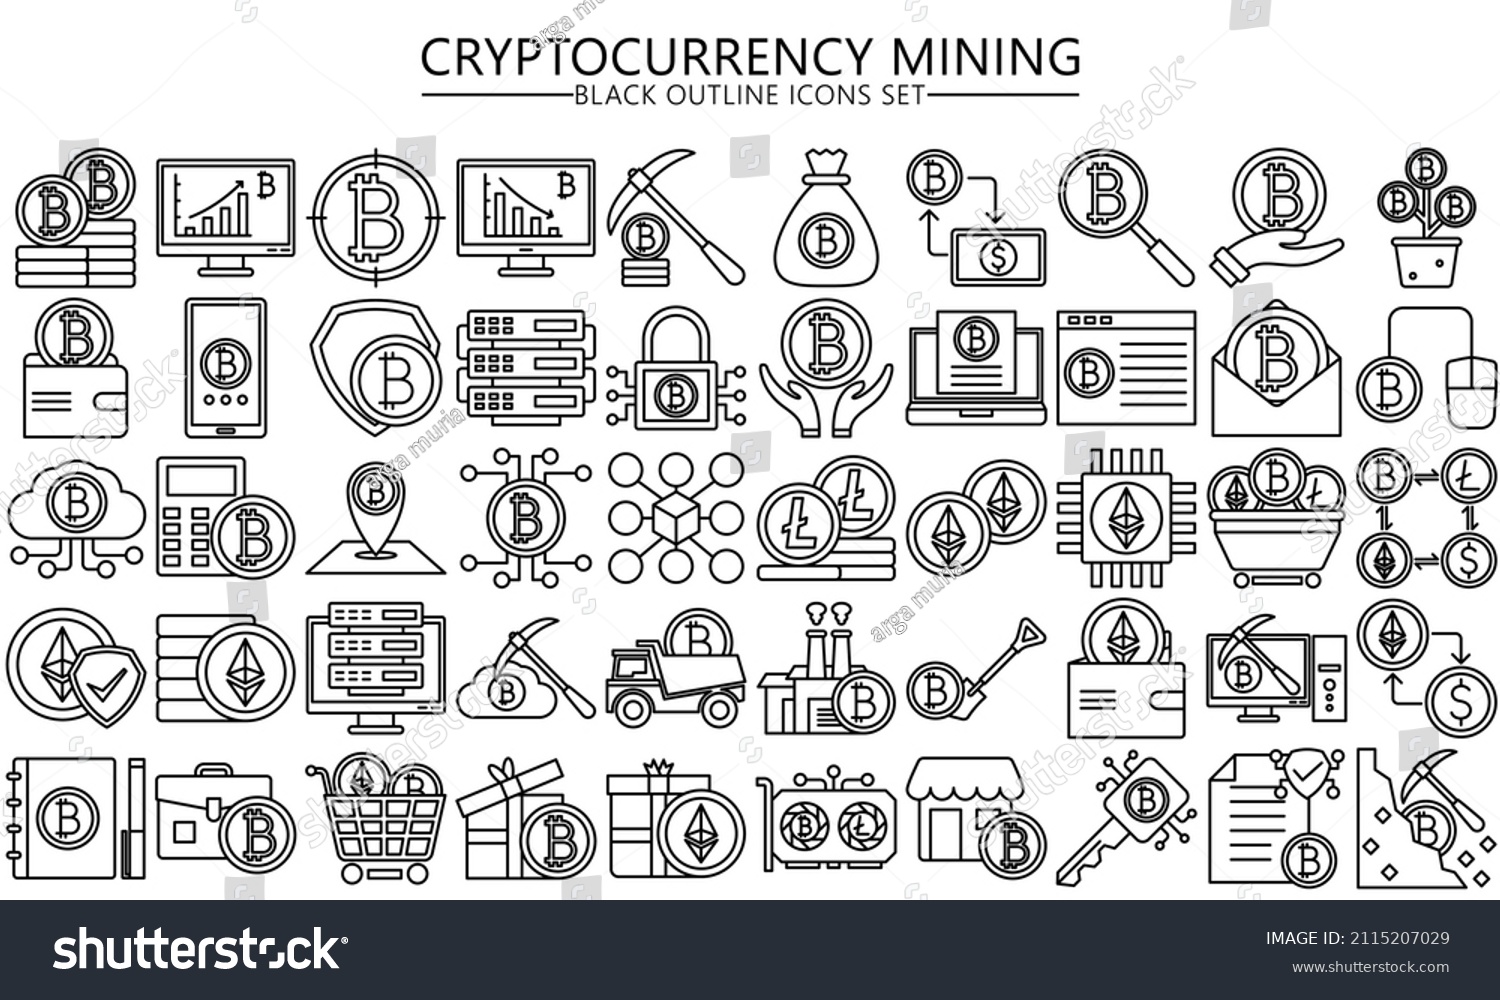 SVG of Cryptocurrency mining black outline icon set. bitcoin, litecoin, ethereum, fintech pictograms for web and mobile app GUI. Blockchain technology simple UI, UX vector icons, EPS 10 ready convert to SVG svg